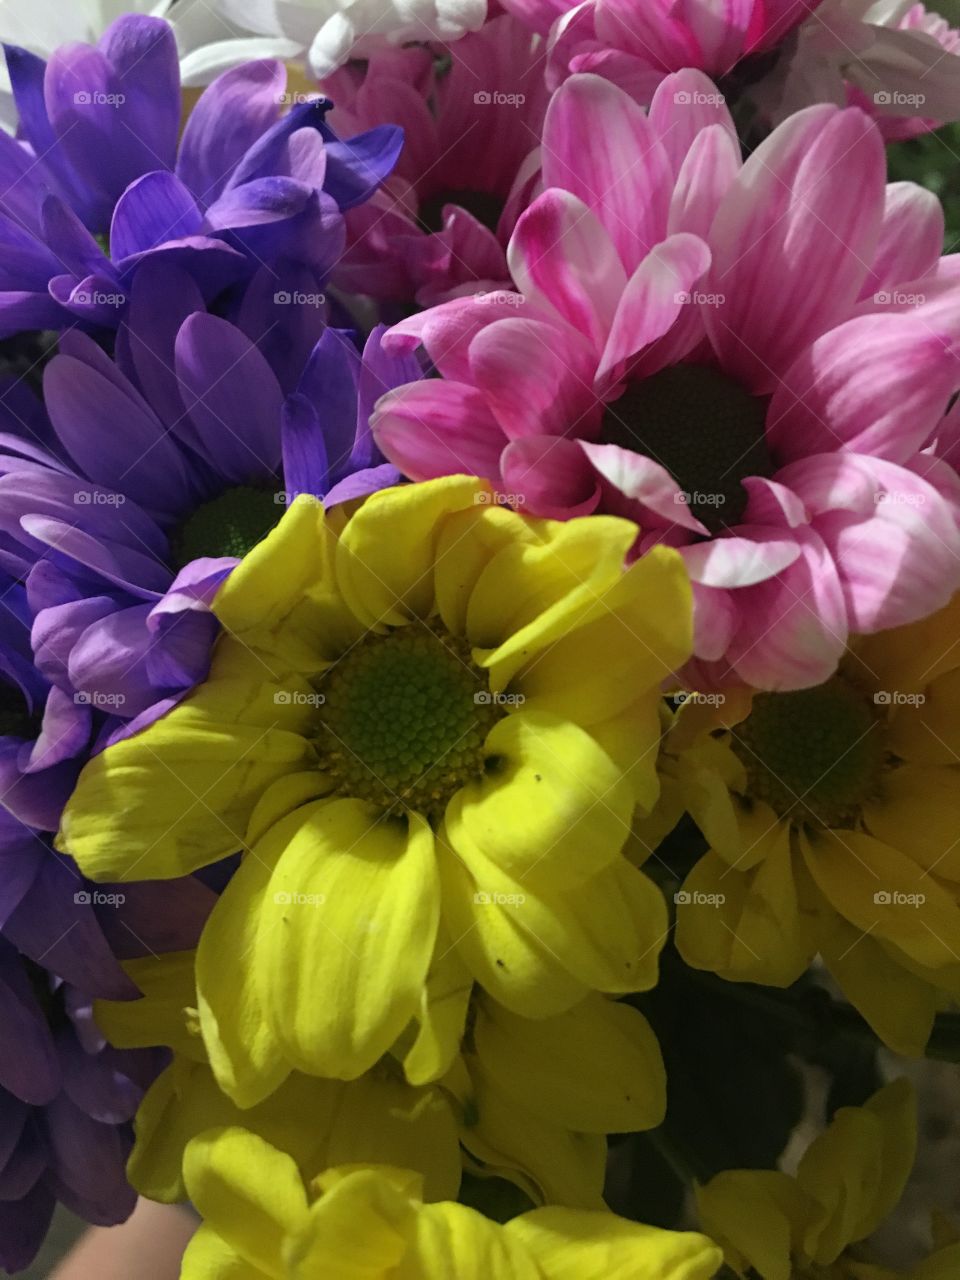 Colourful spring flowers 